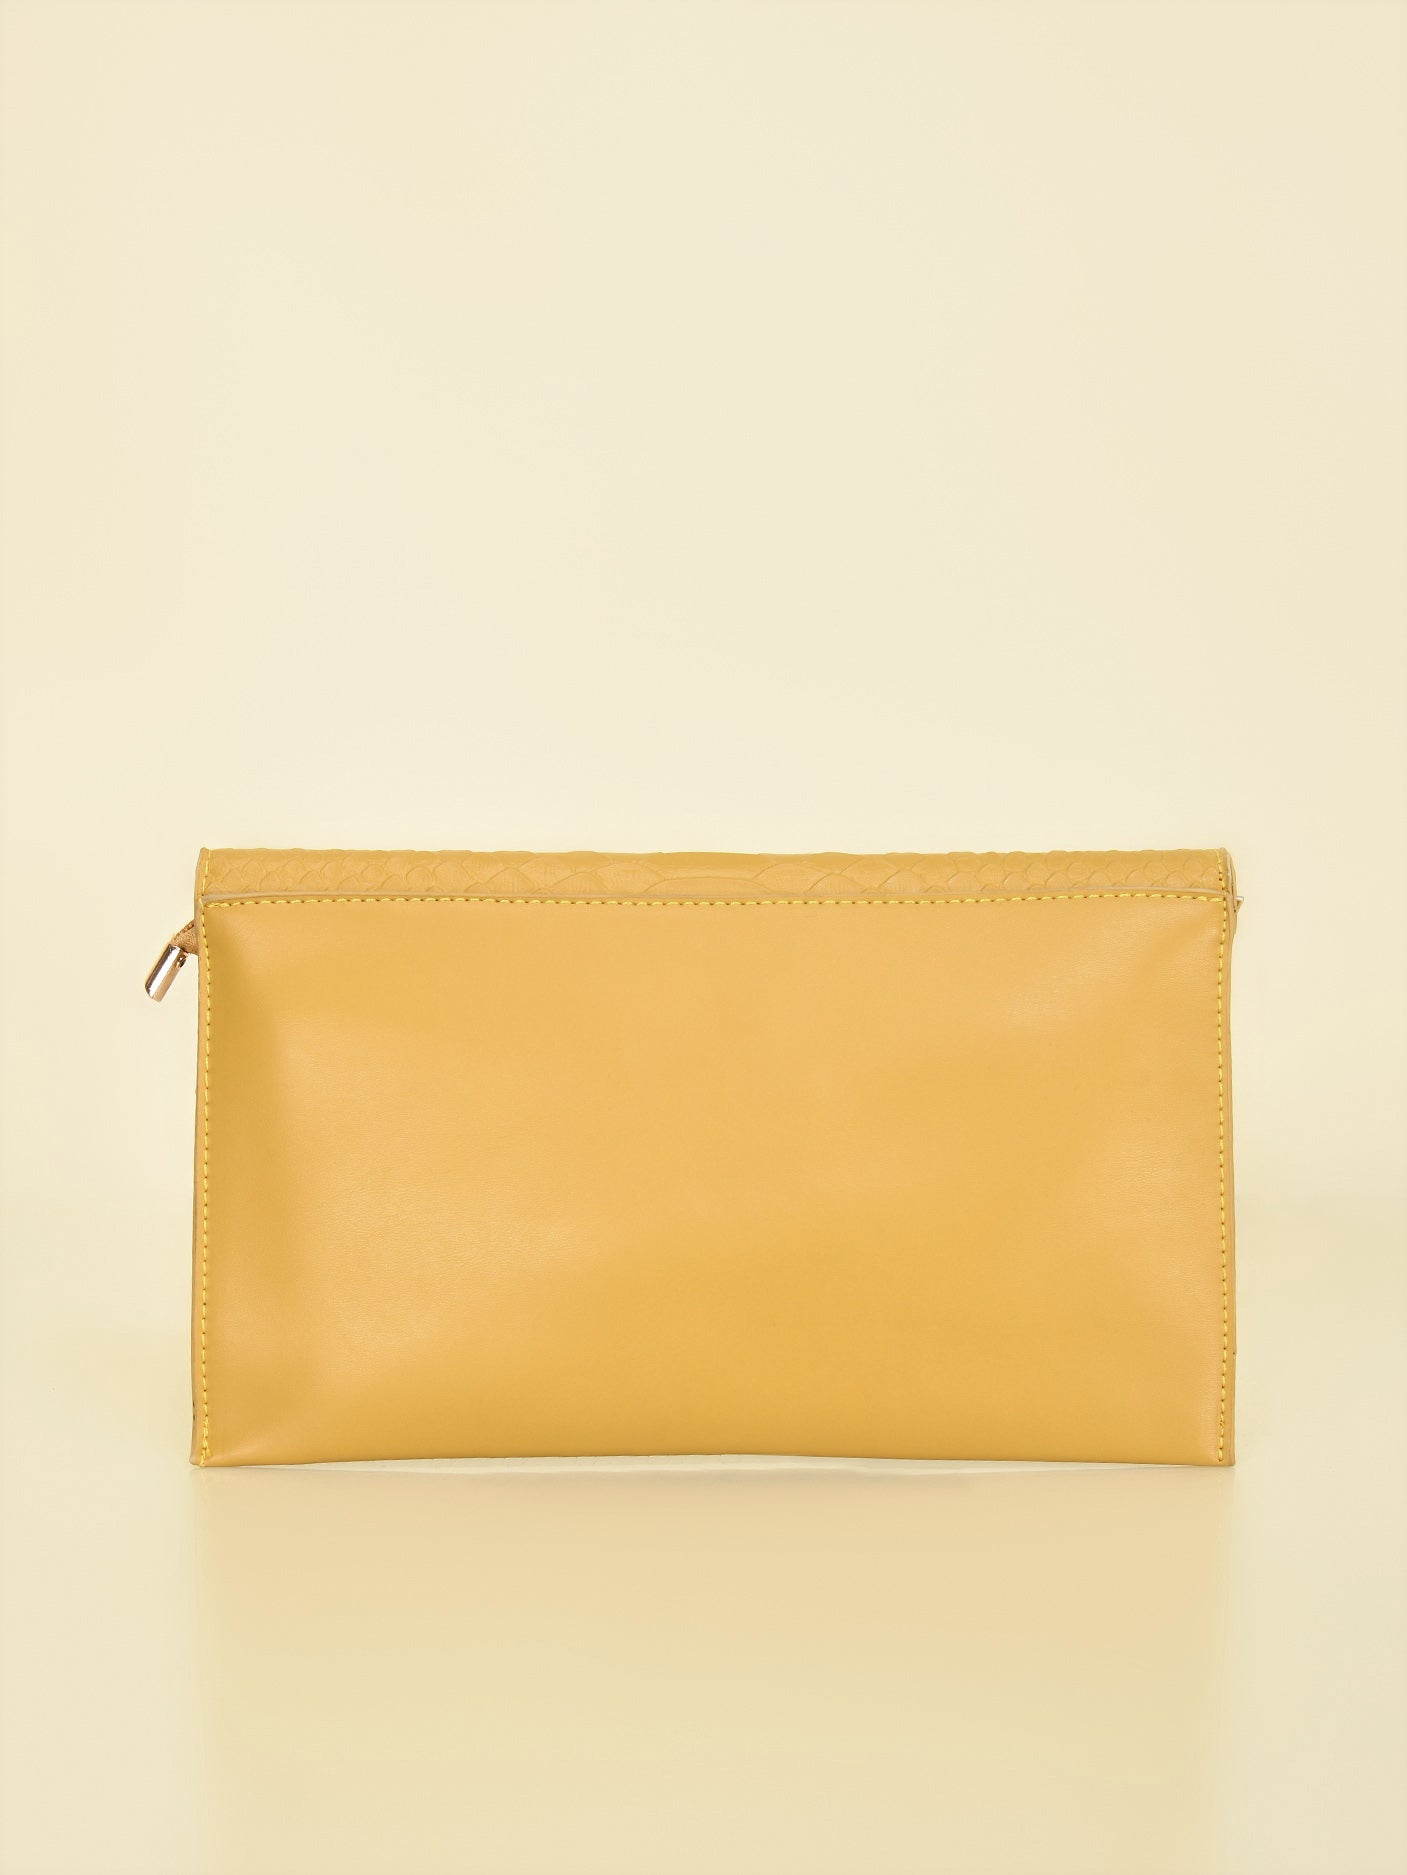 Scale Patterened Clutch